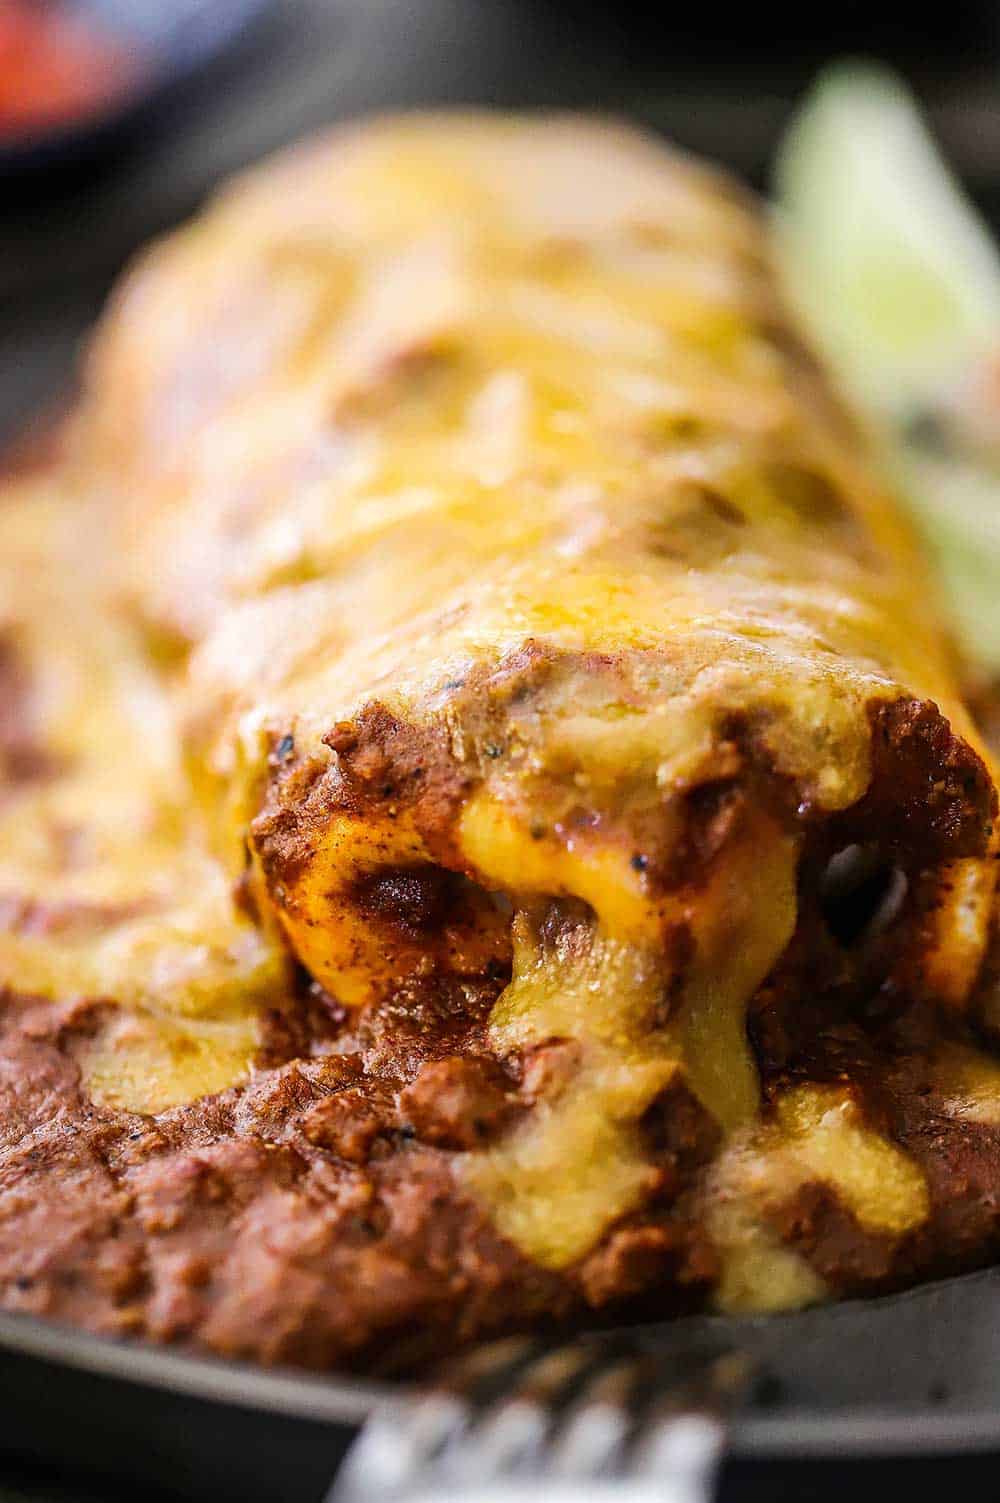 A close-up view of smothered beef burritos covered in chili con carne sauce and melted cheddar cheese.